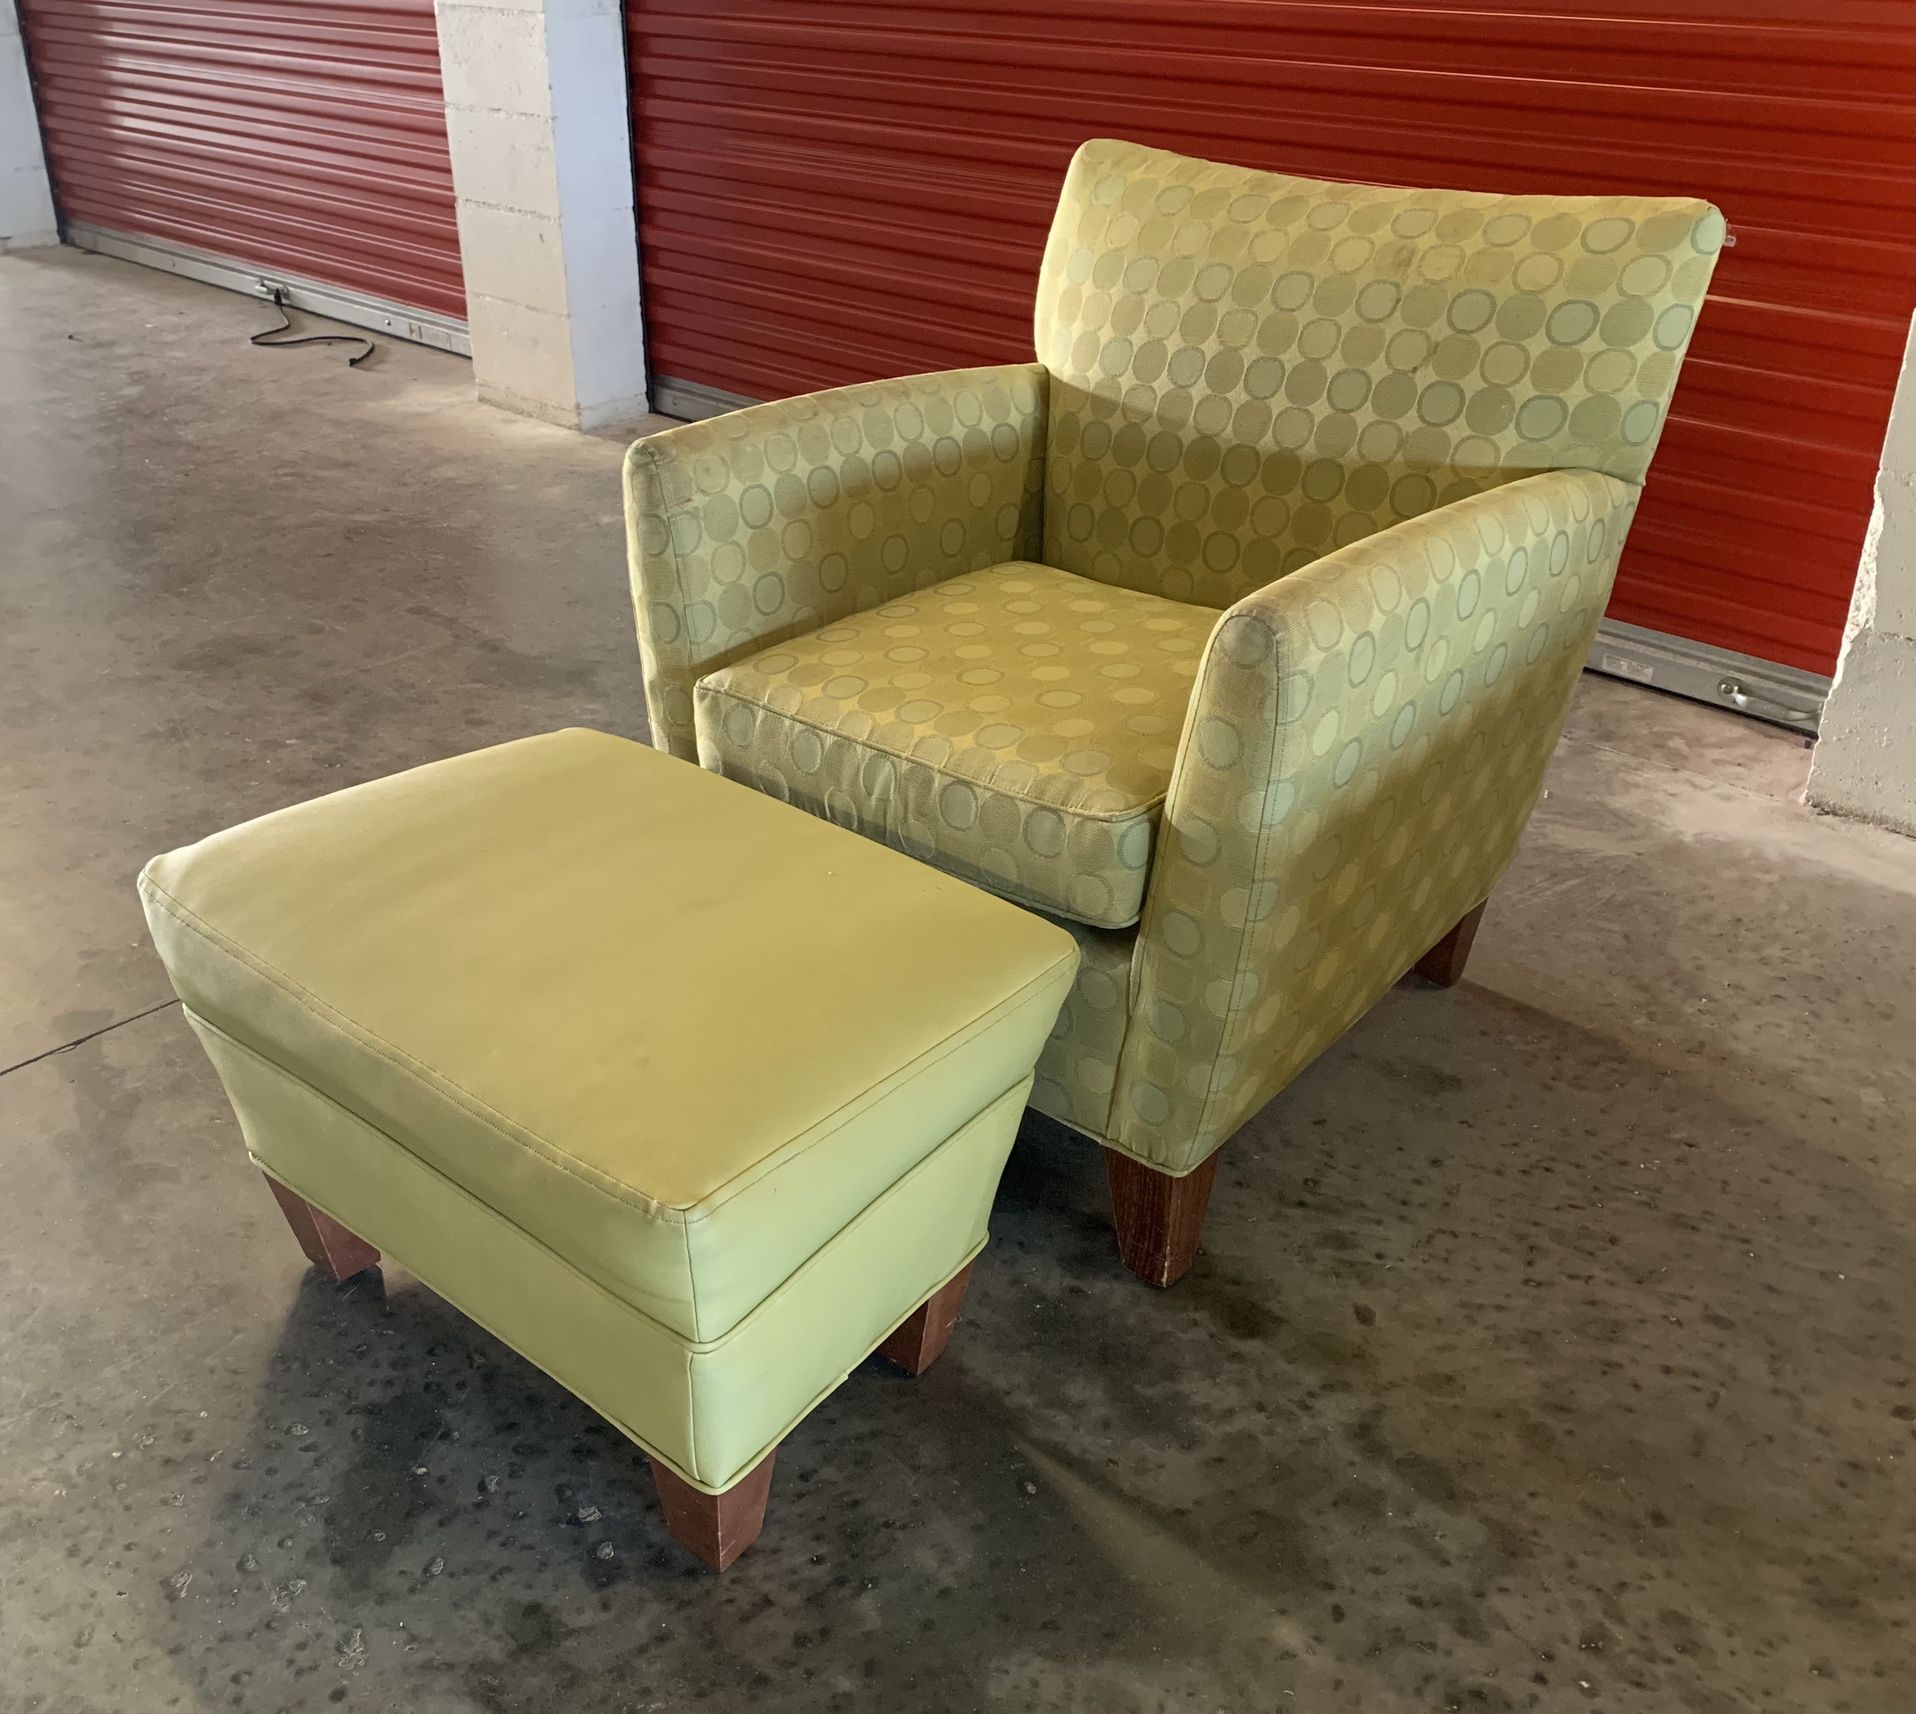 $75 for (1) Accent Chair and Ottoman Set